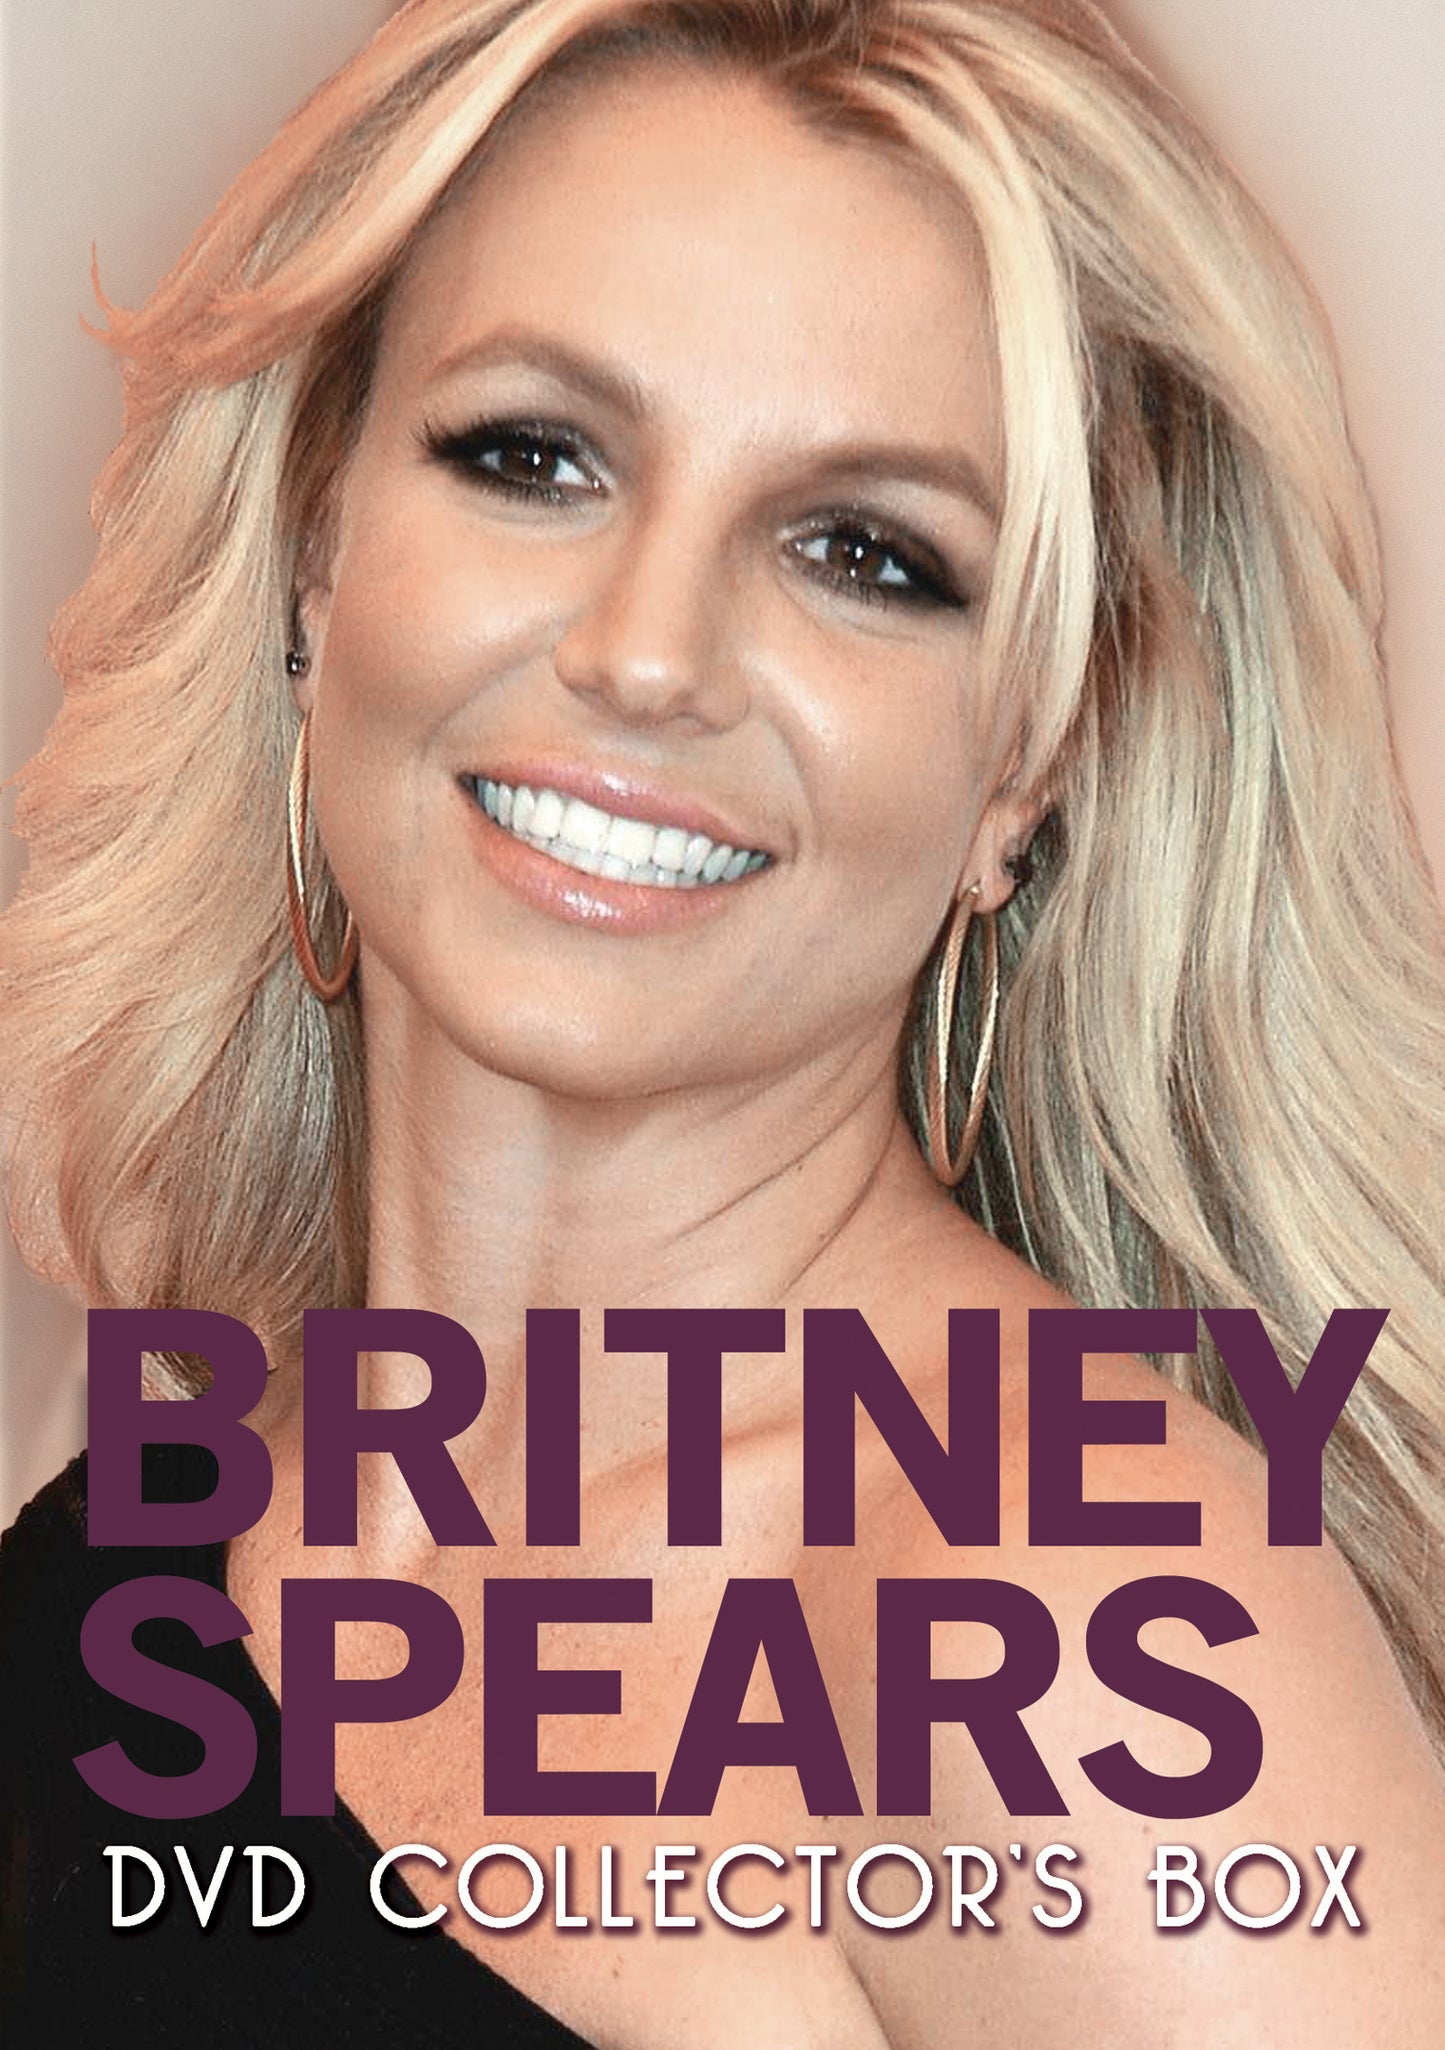 Britney Spears - DVD Collector's Box (DVD)